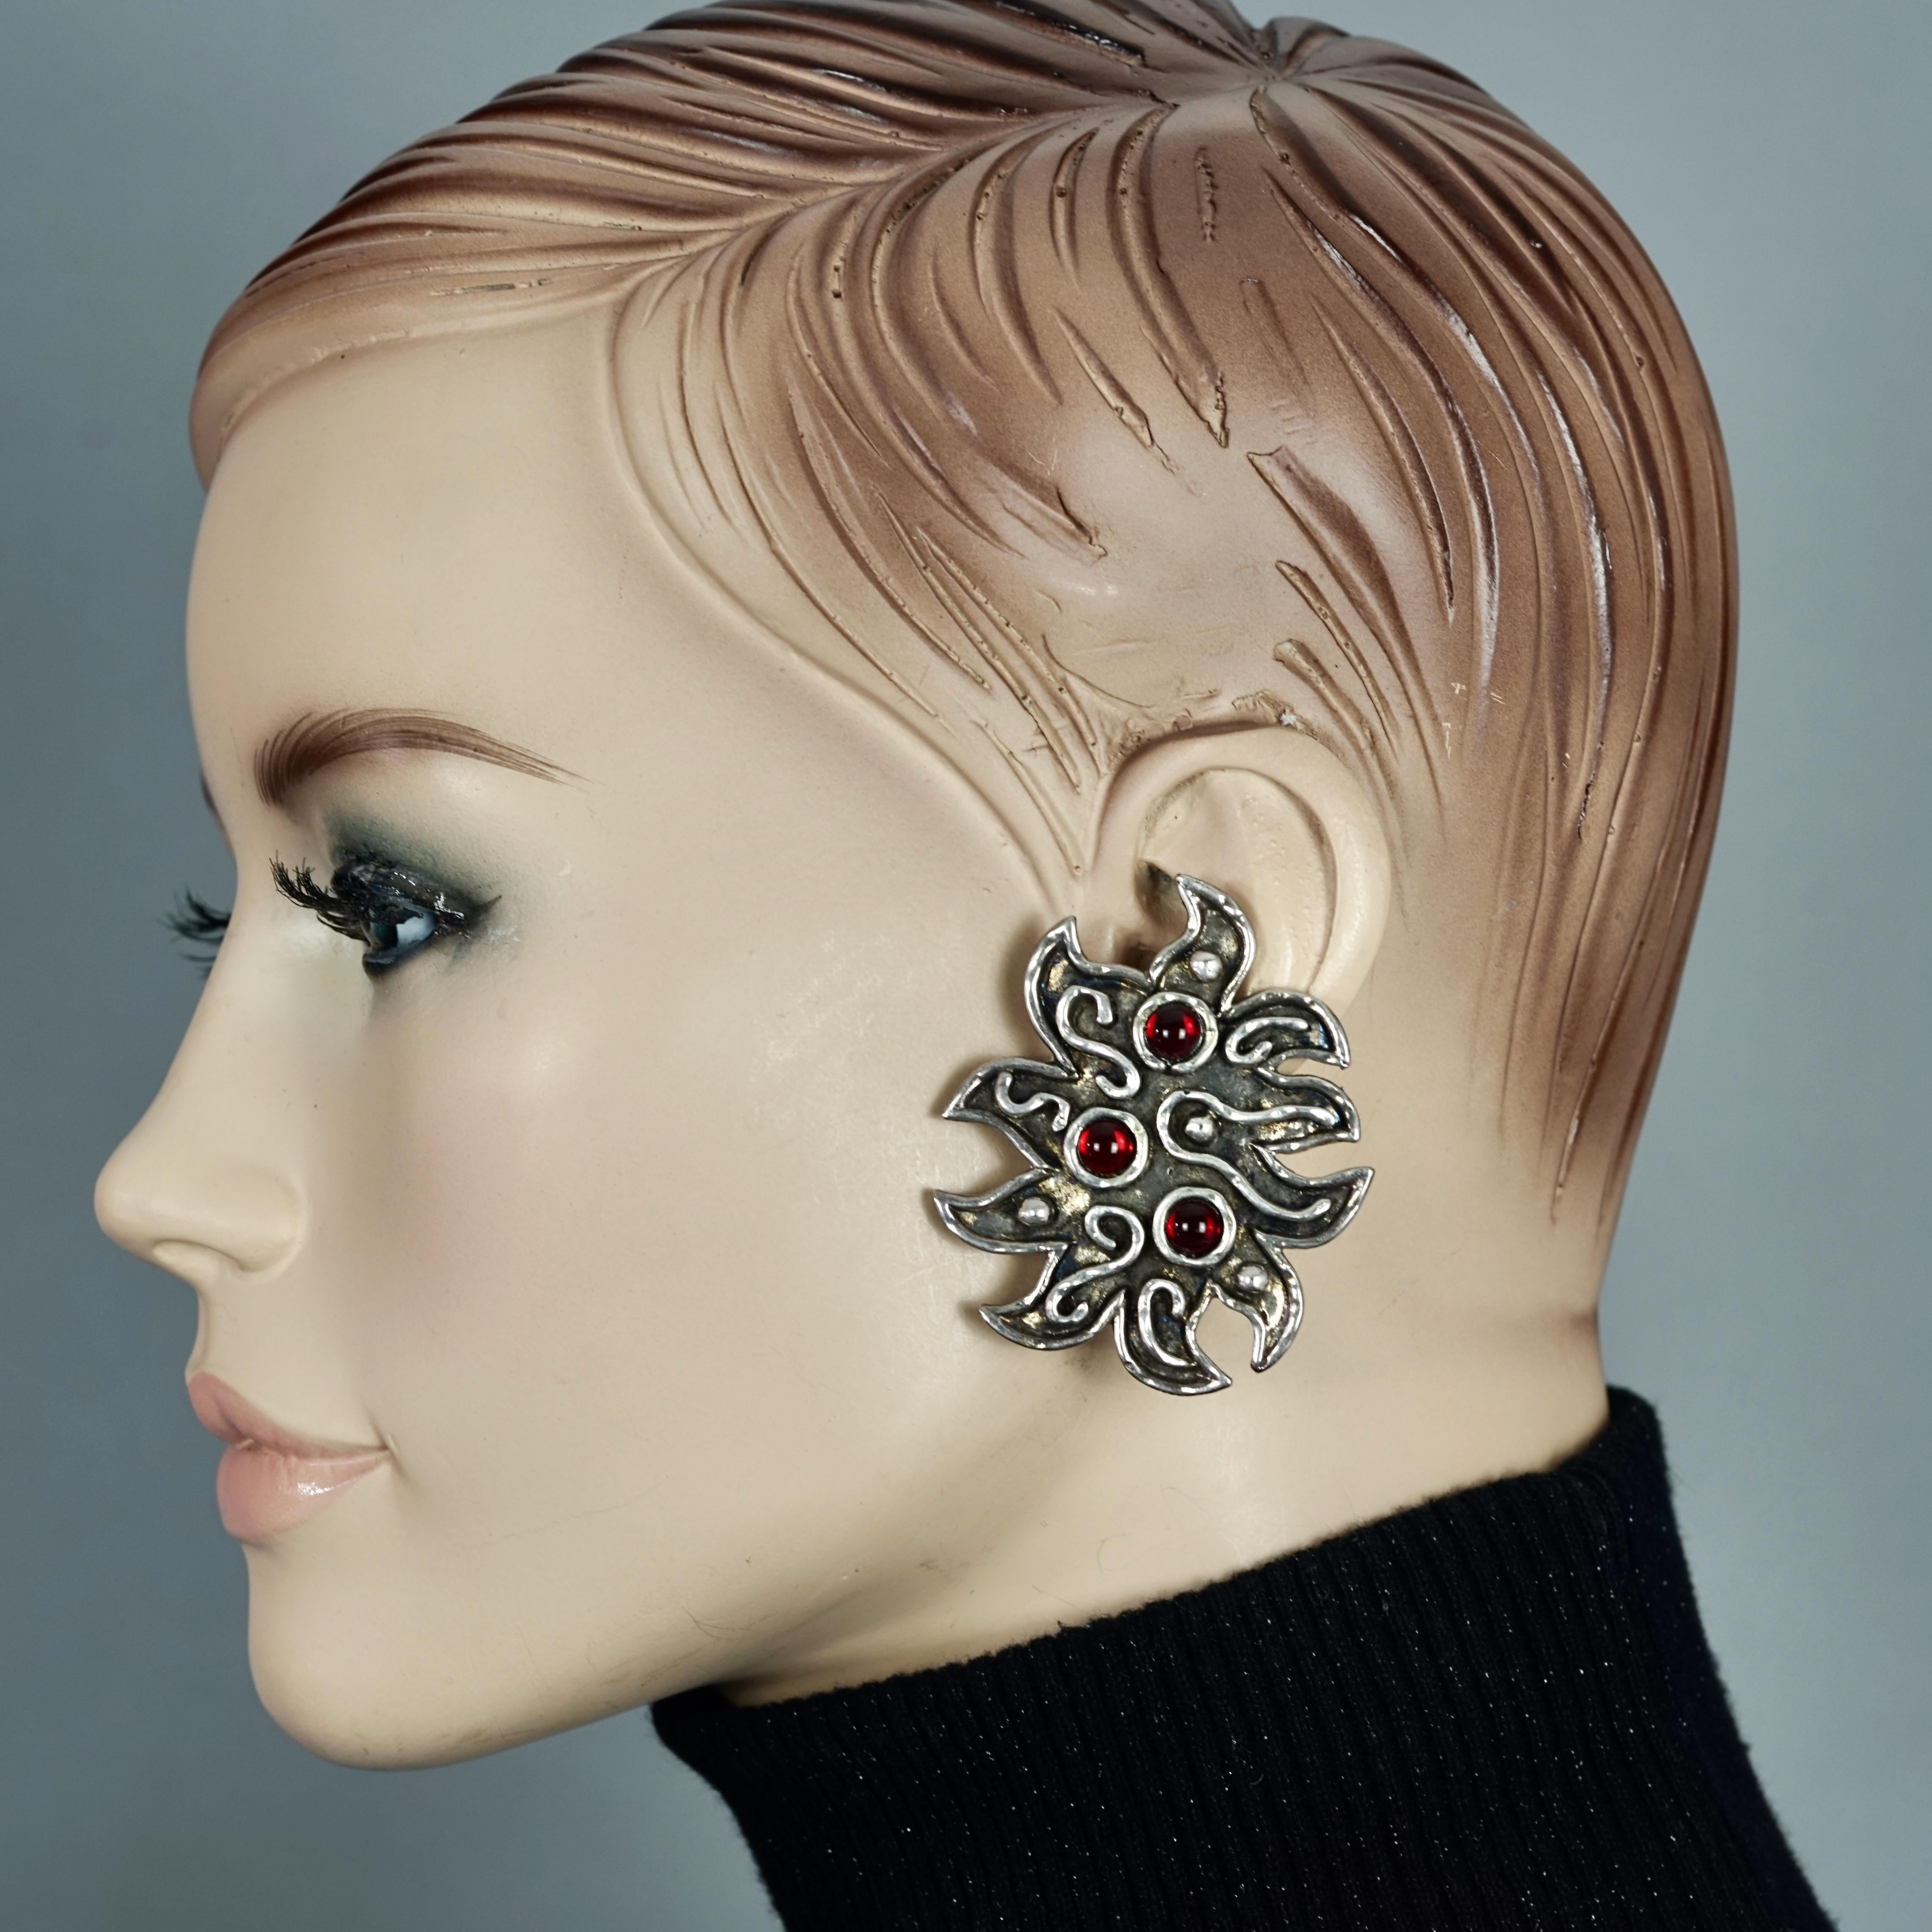 Vintage Massive EDOUARD RAMBAUD Ethnic Jeweled Silver Earrings

Measurements:
Height: 2.24 inches (5.7 cm)
Width: 1.85 inches (4.7 cm)
Weight per Earring: 19 grams

Features:
- 100% Authentic EDOUARD RAMBAUD.
- Massive ethnic statement earrings with